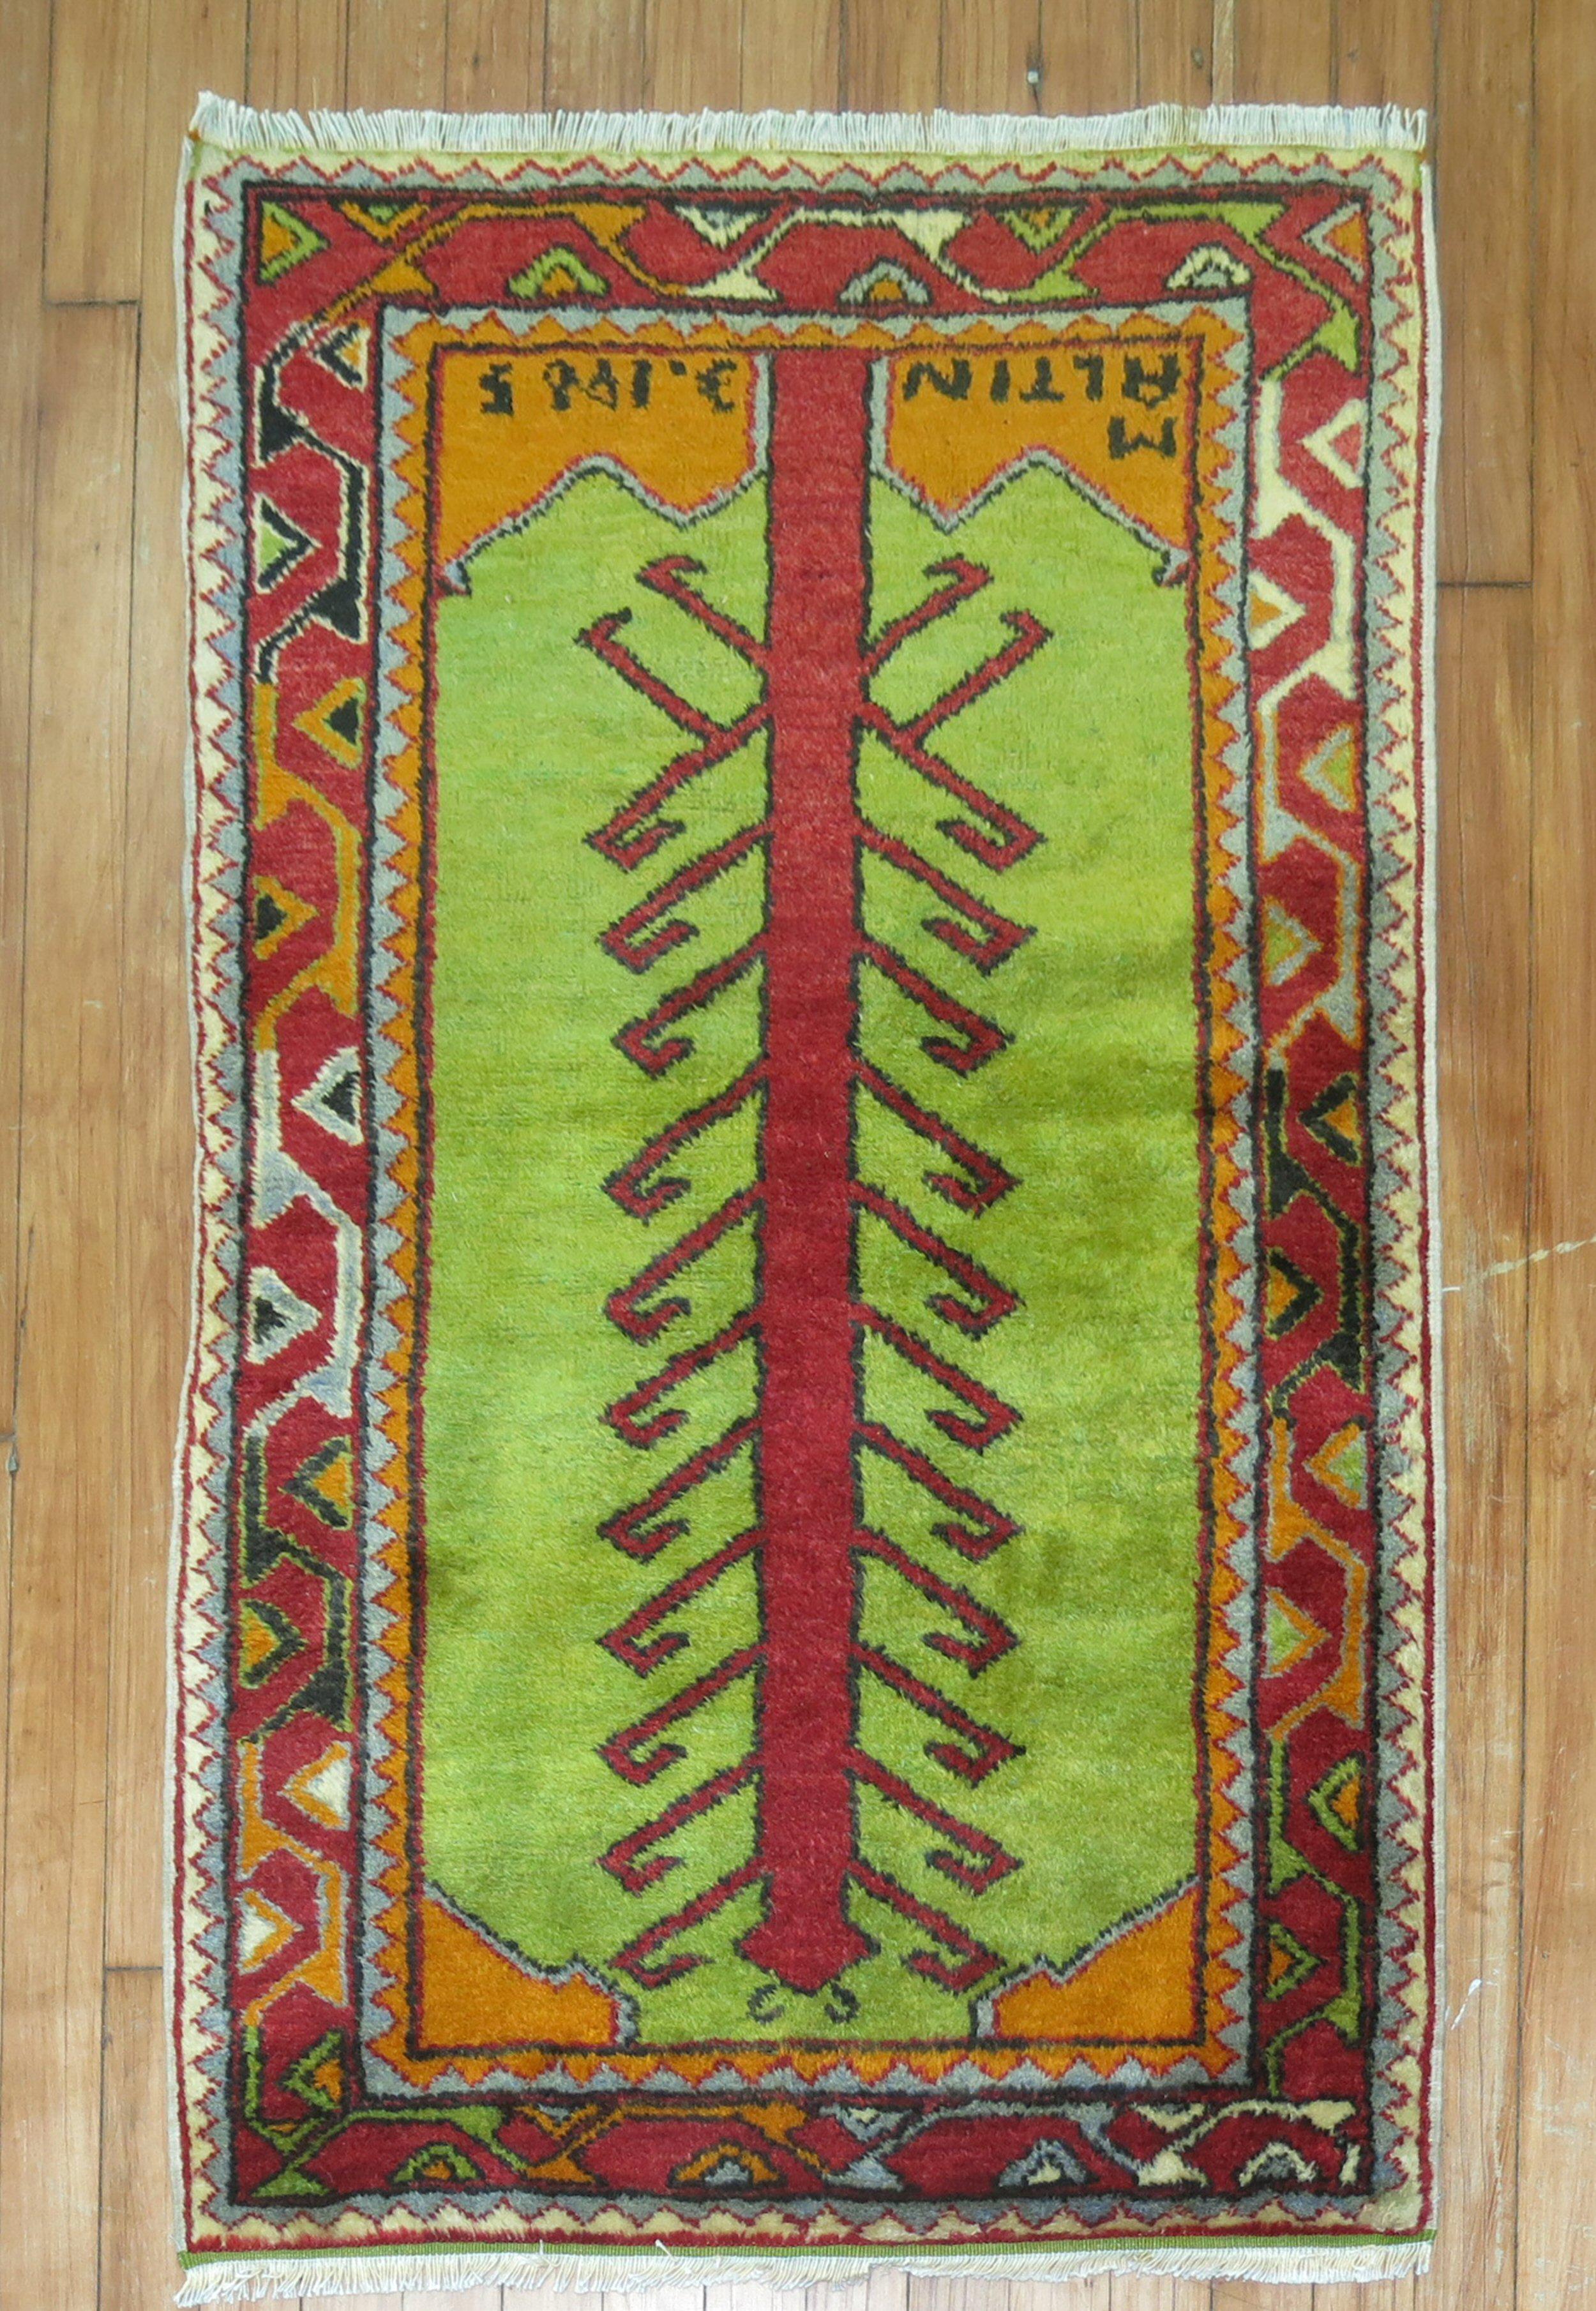 Full pile Turkish Anatolian Tribal rug in green, dated 1985 and signed by weaver

circa 1940. Measures: 2'4'' x 3'9''.